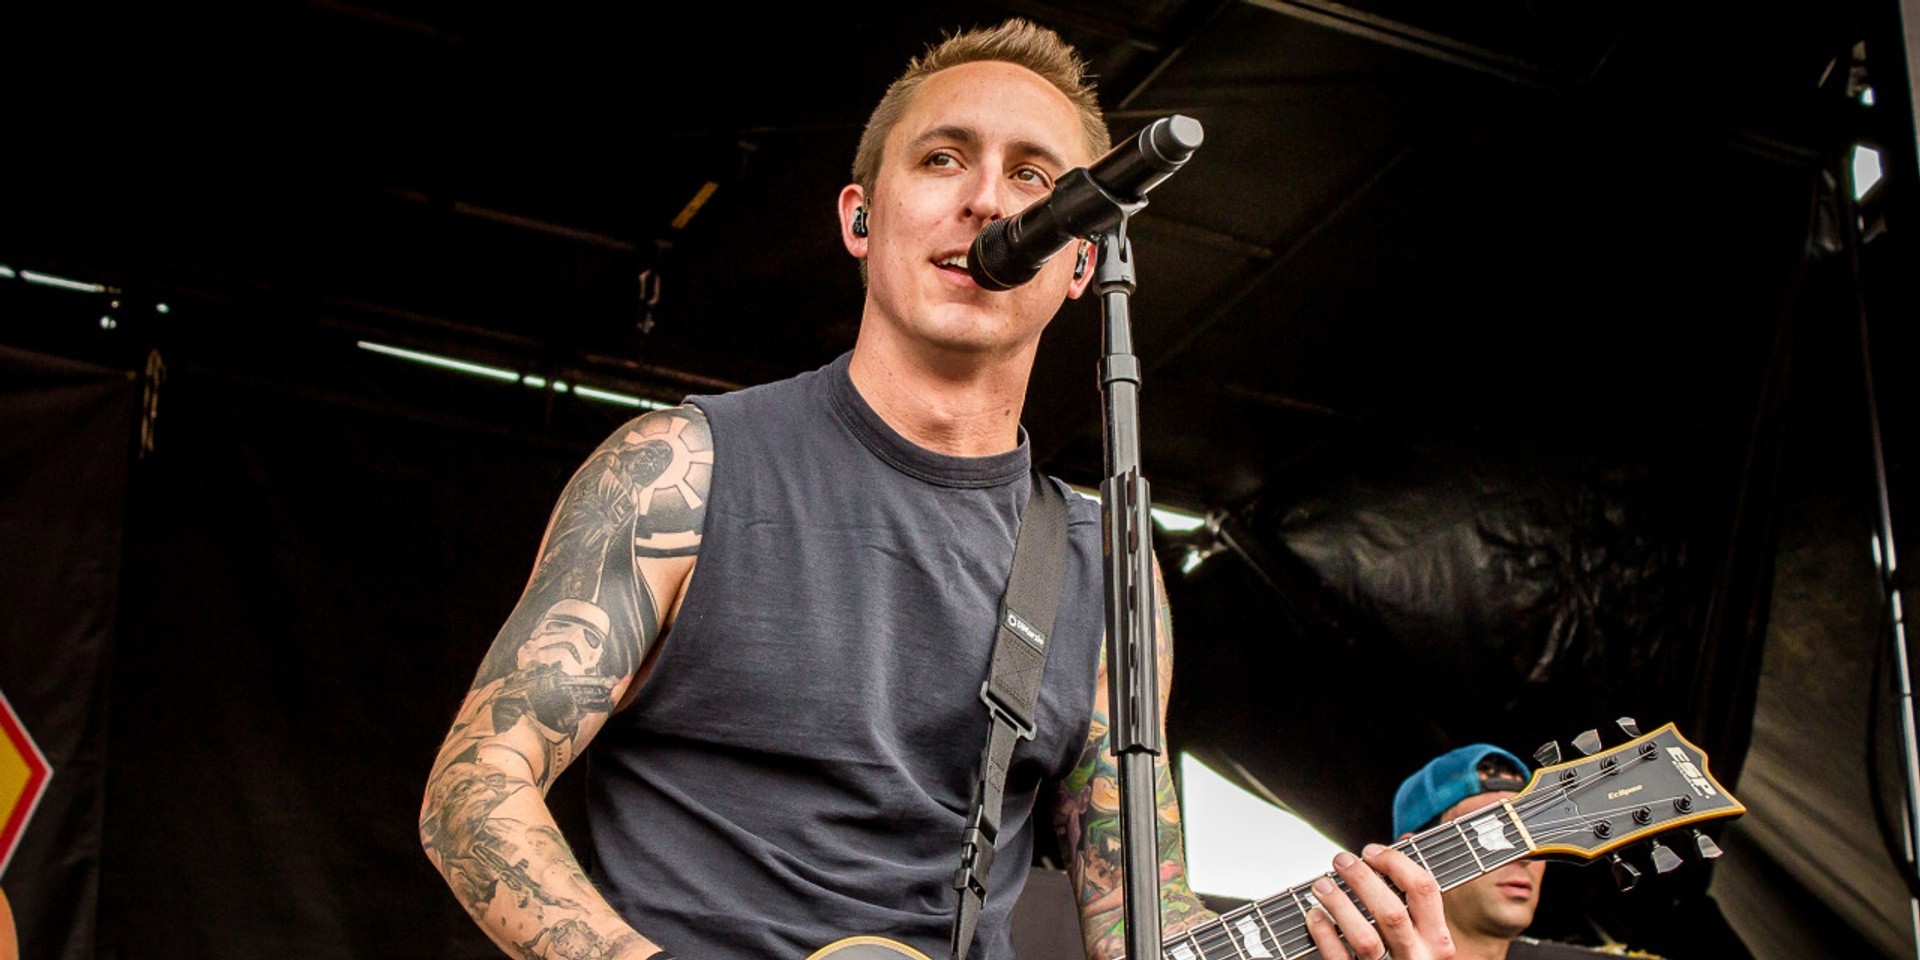 CONTEST: Meet Ryan Key of Yellowcard when he's in town on 17 May